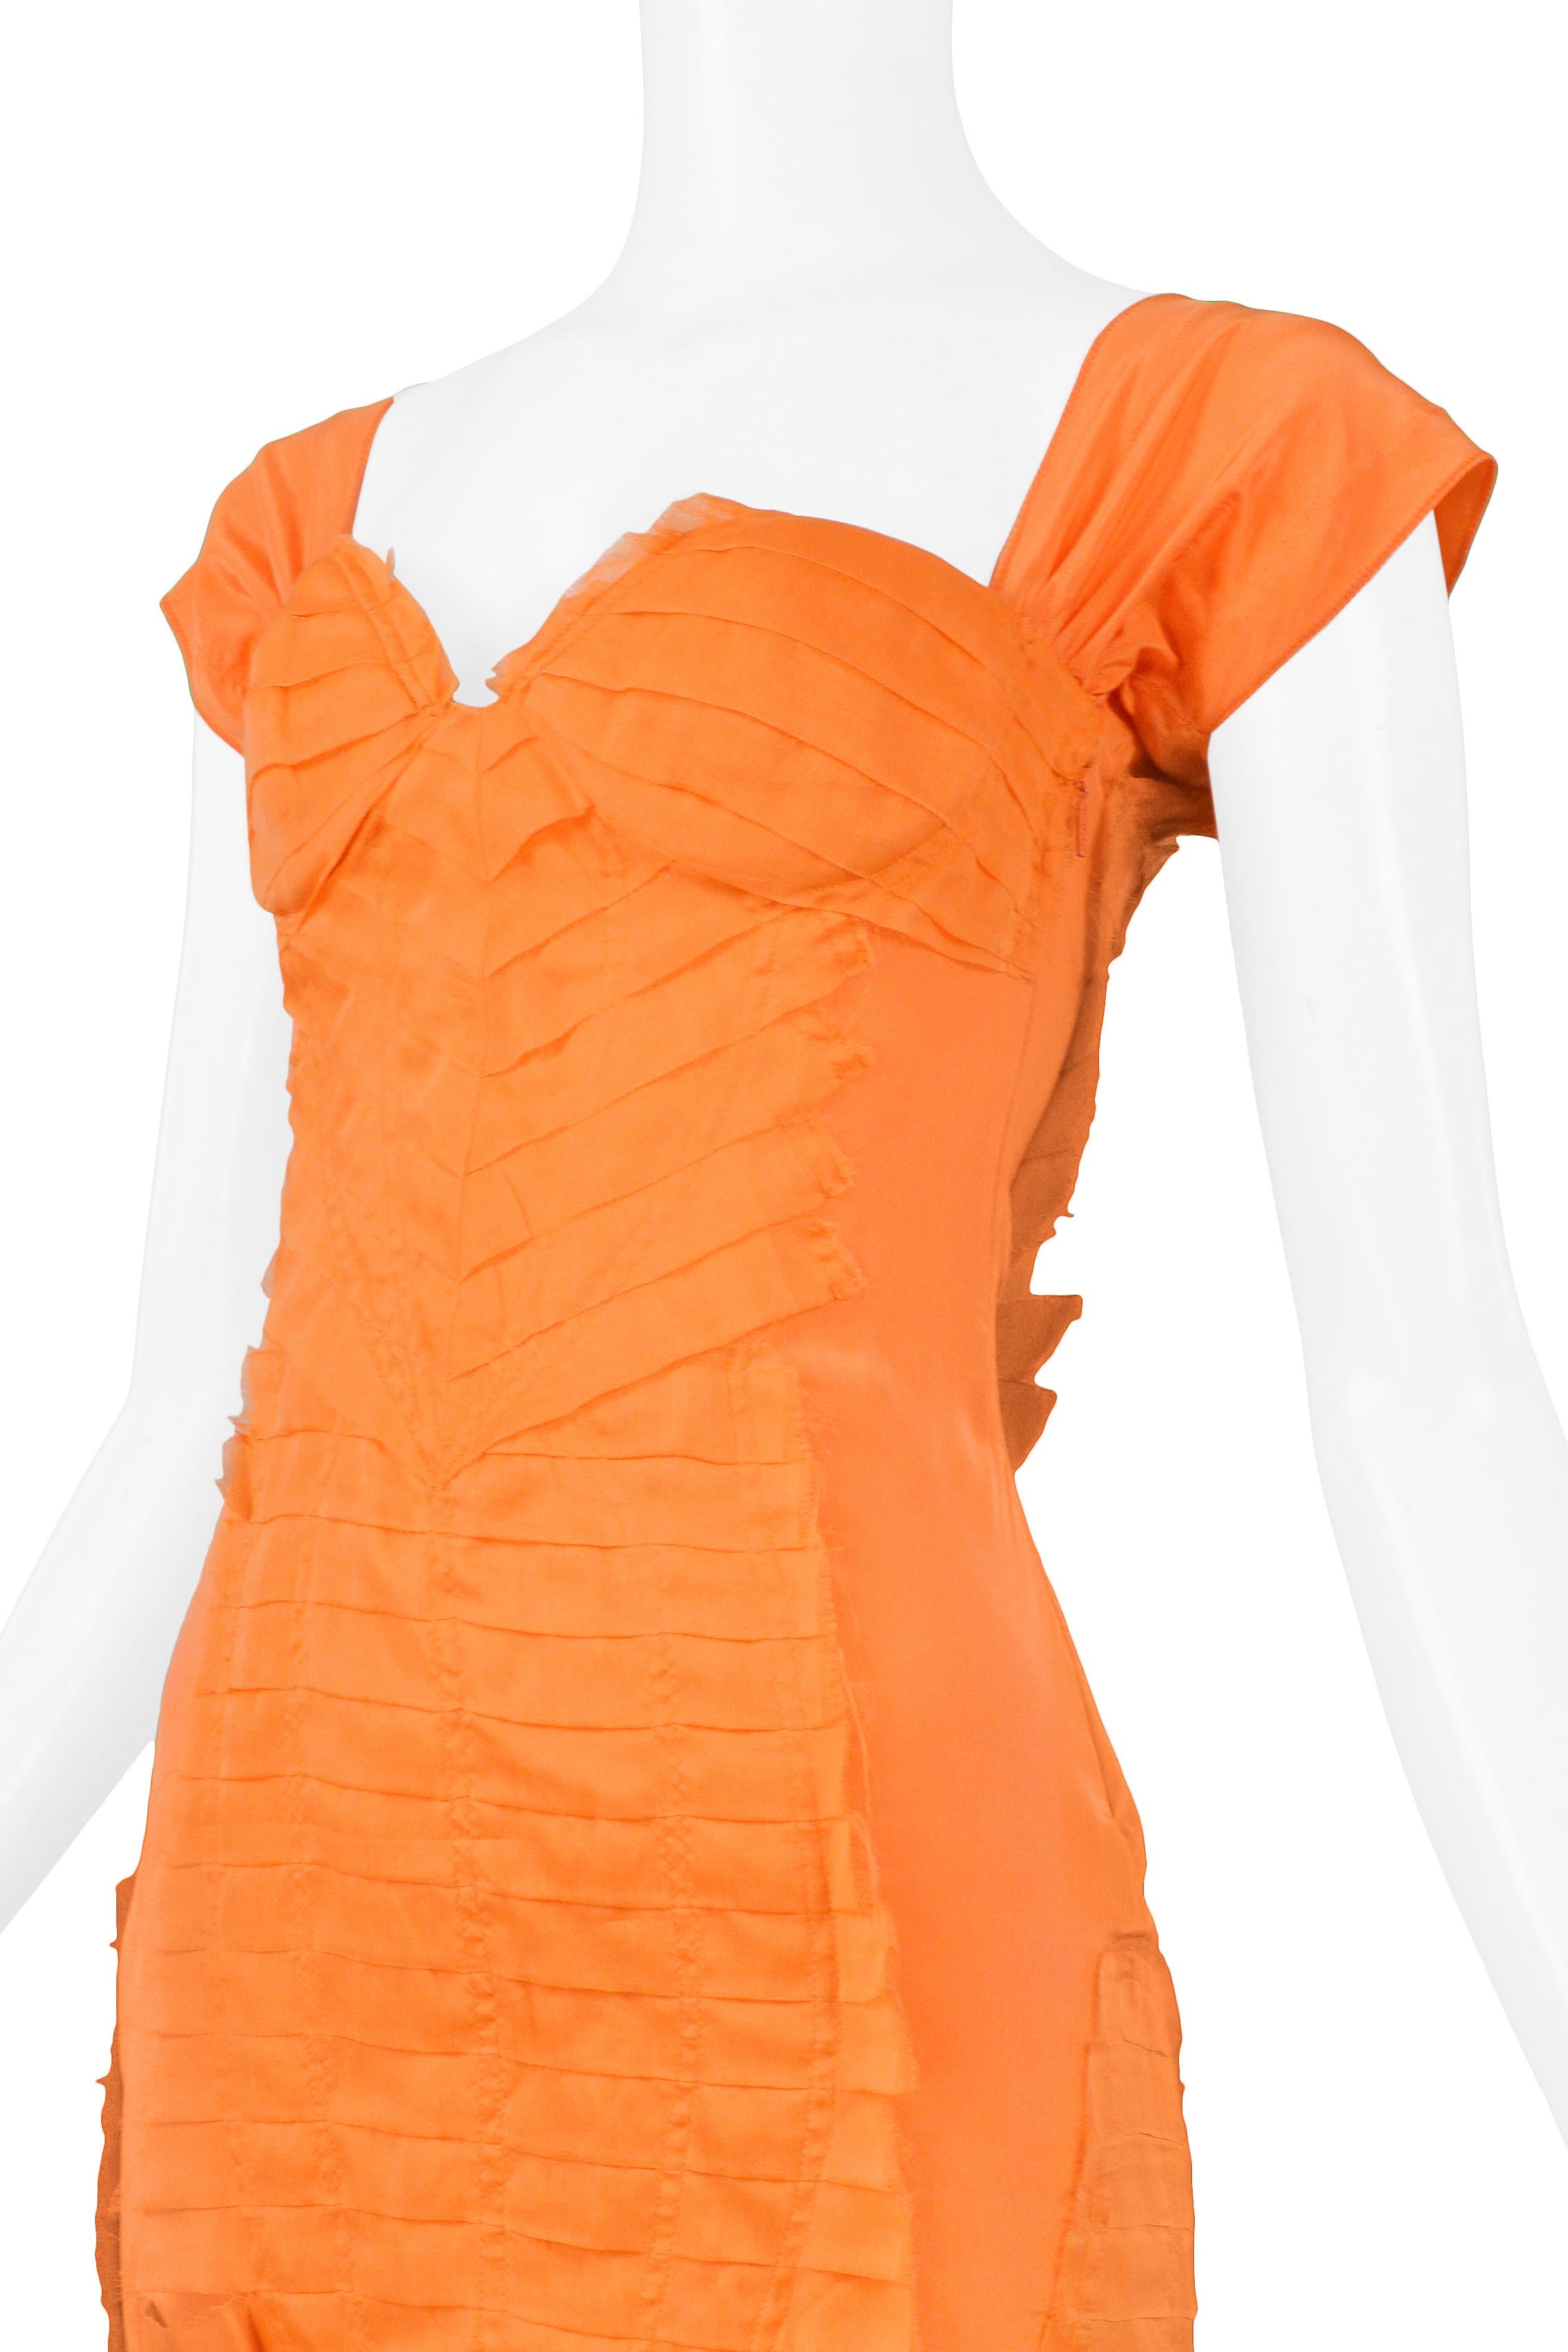 Women's Vintage Gucci by Tom Ford Orange Silk Cocktail Dress  Runway 2004 For Sale